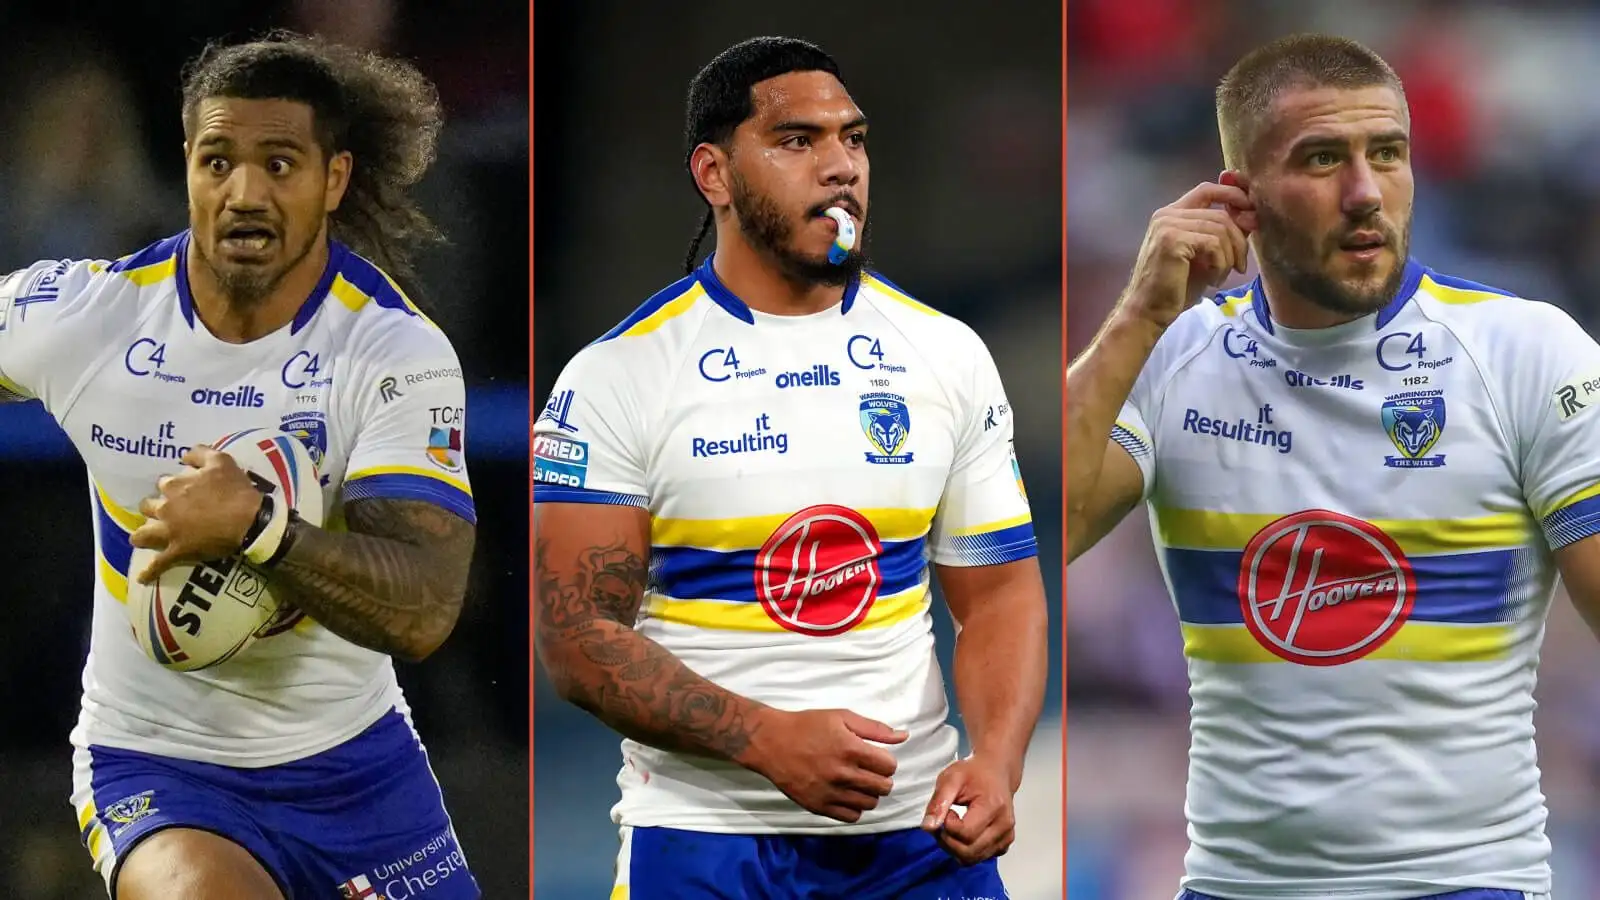 Warrington Wolves announce six player departures at end of season: ‘We wish them all the best in their next chapters’